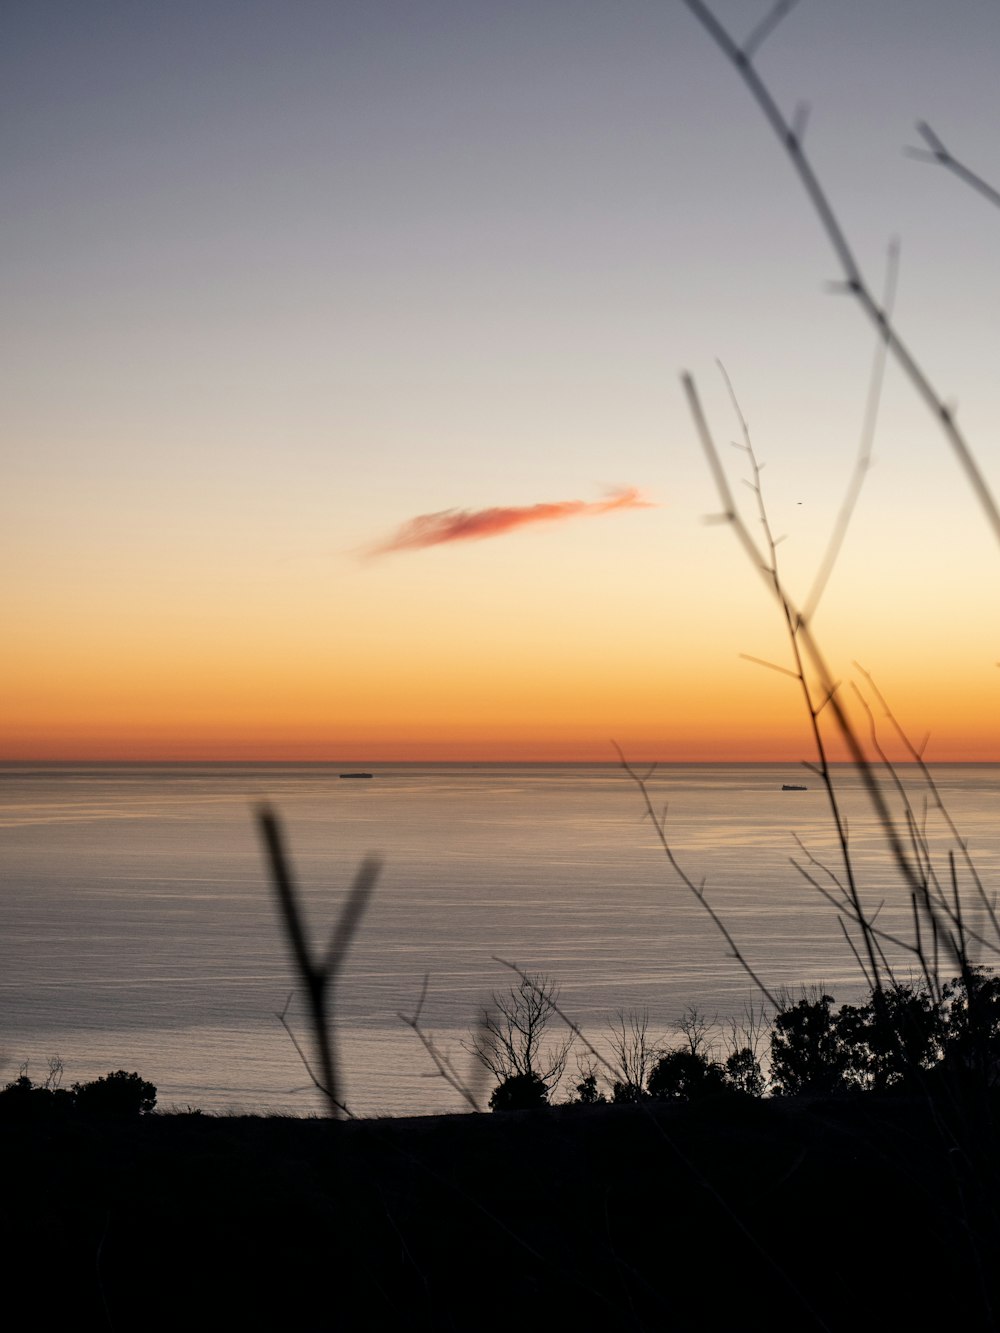 a view of the ocean at sunset from a hill